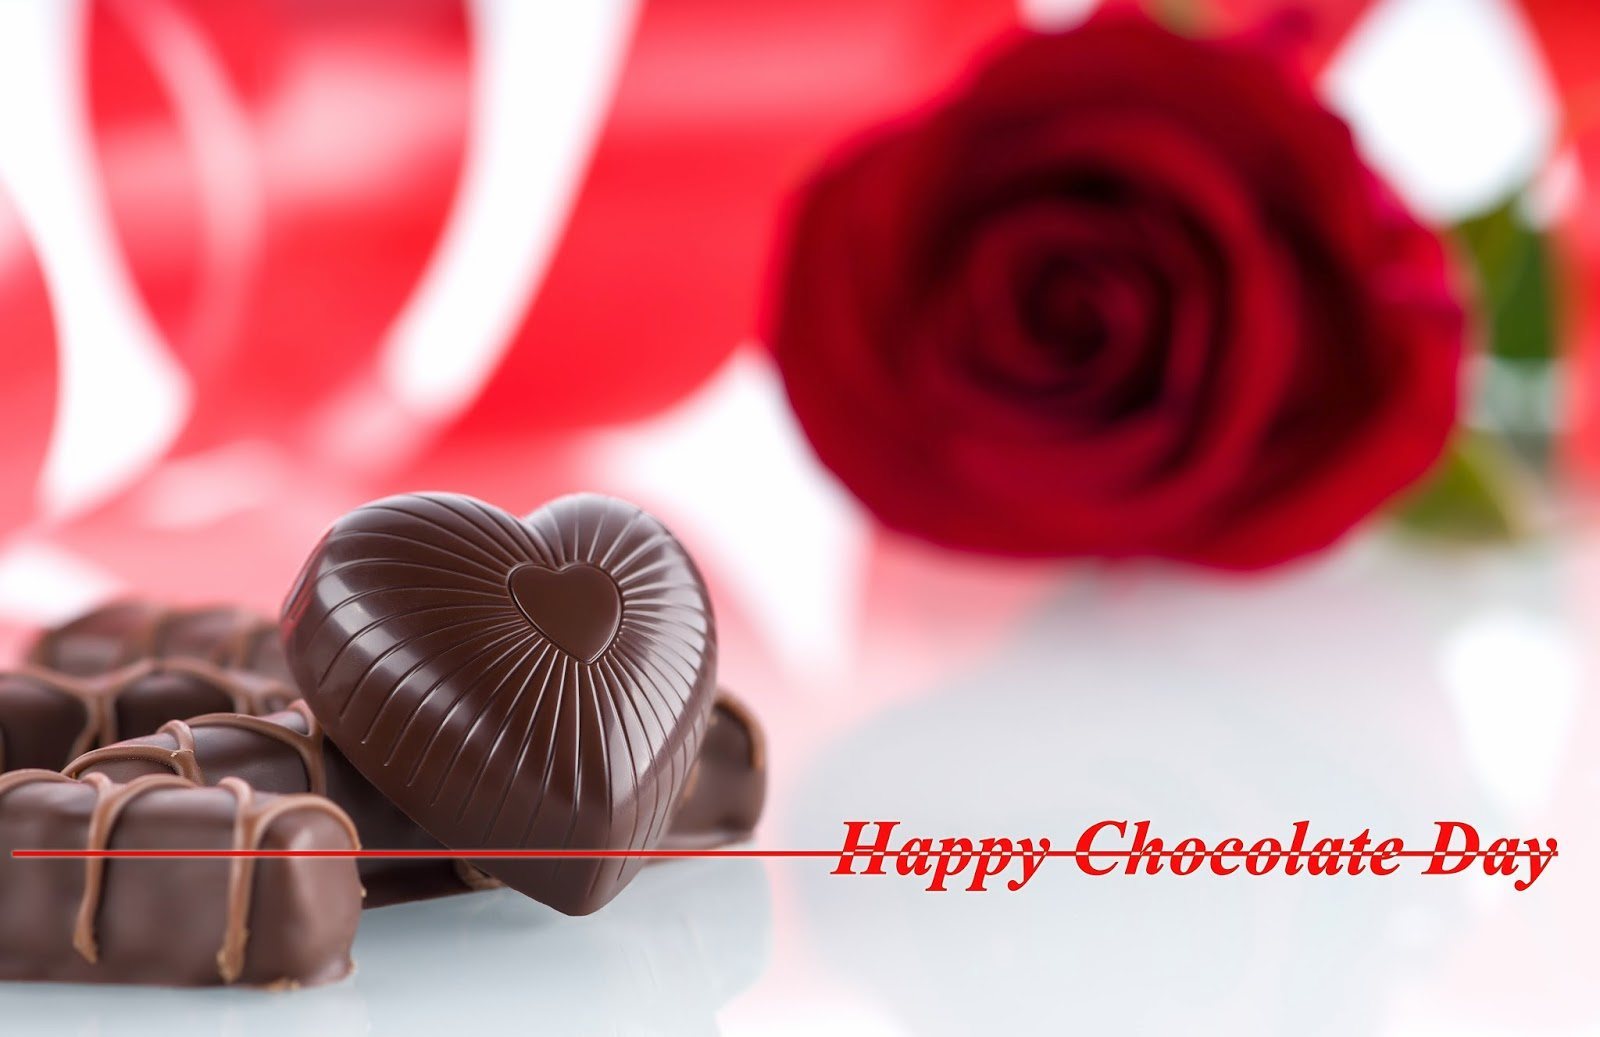 chocolate day quotes images